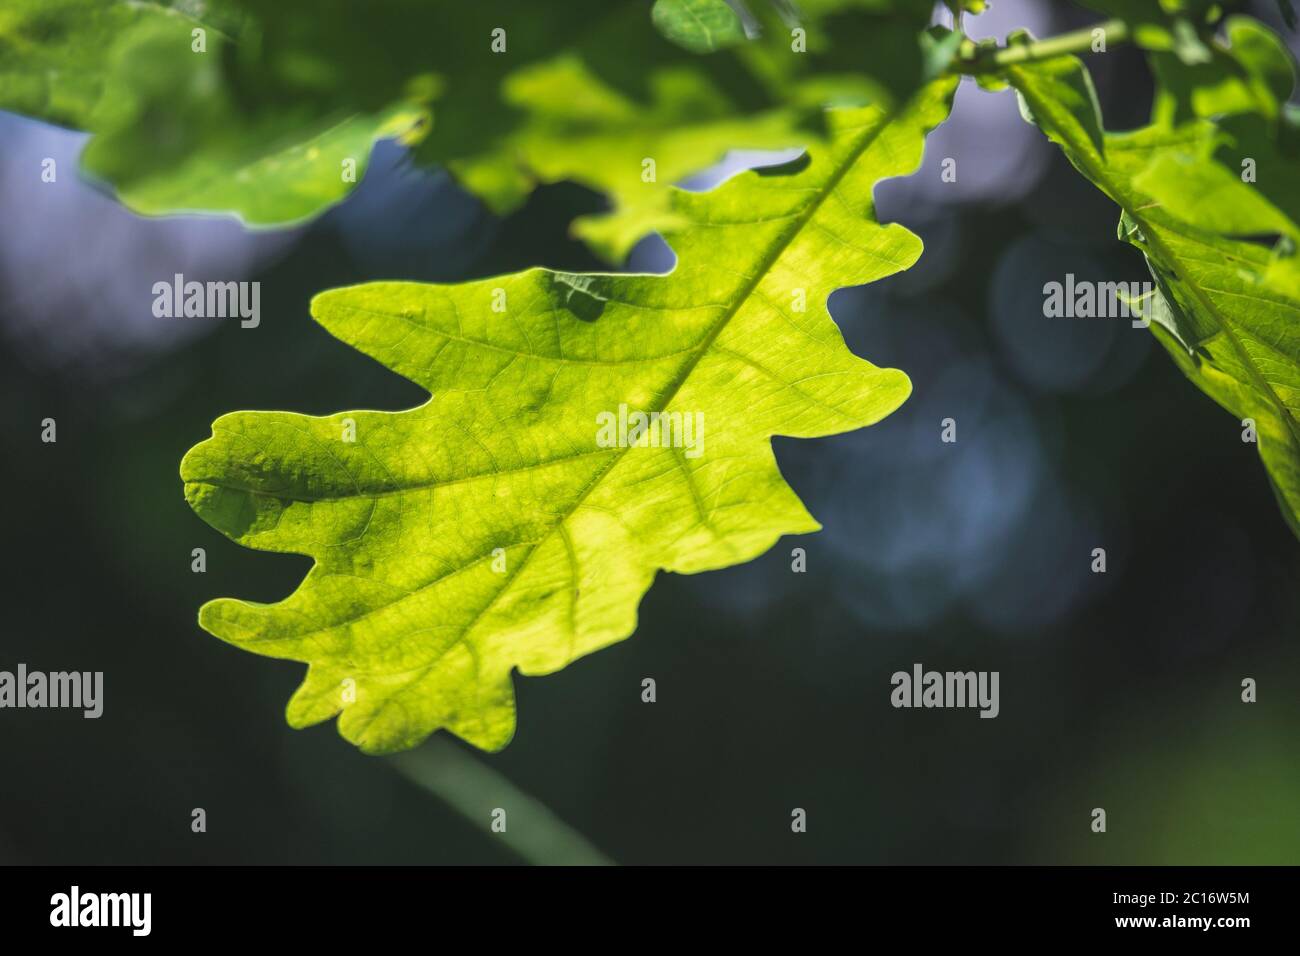 green oak leaf illuminated by the sun, close up view Stock Photo